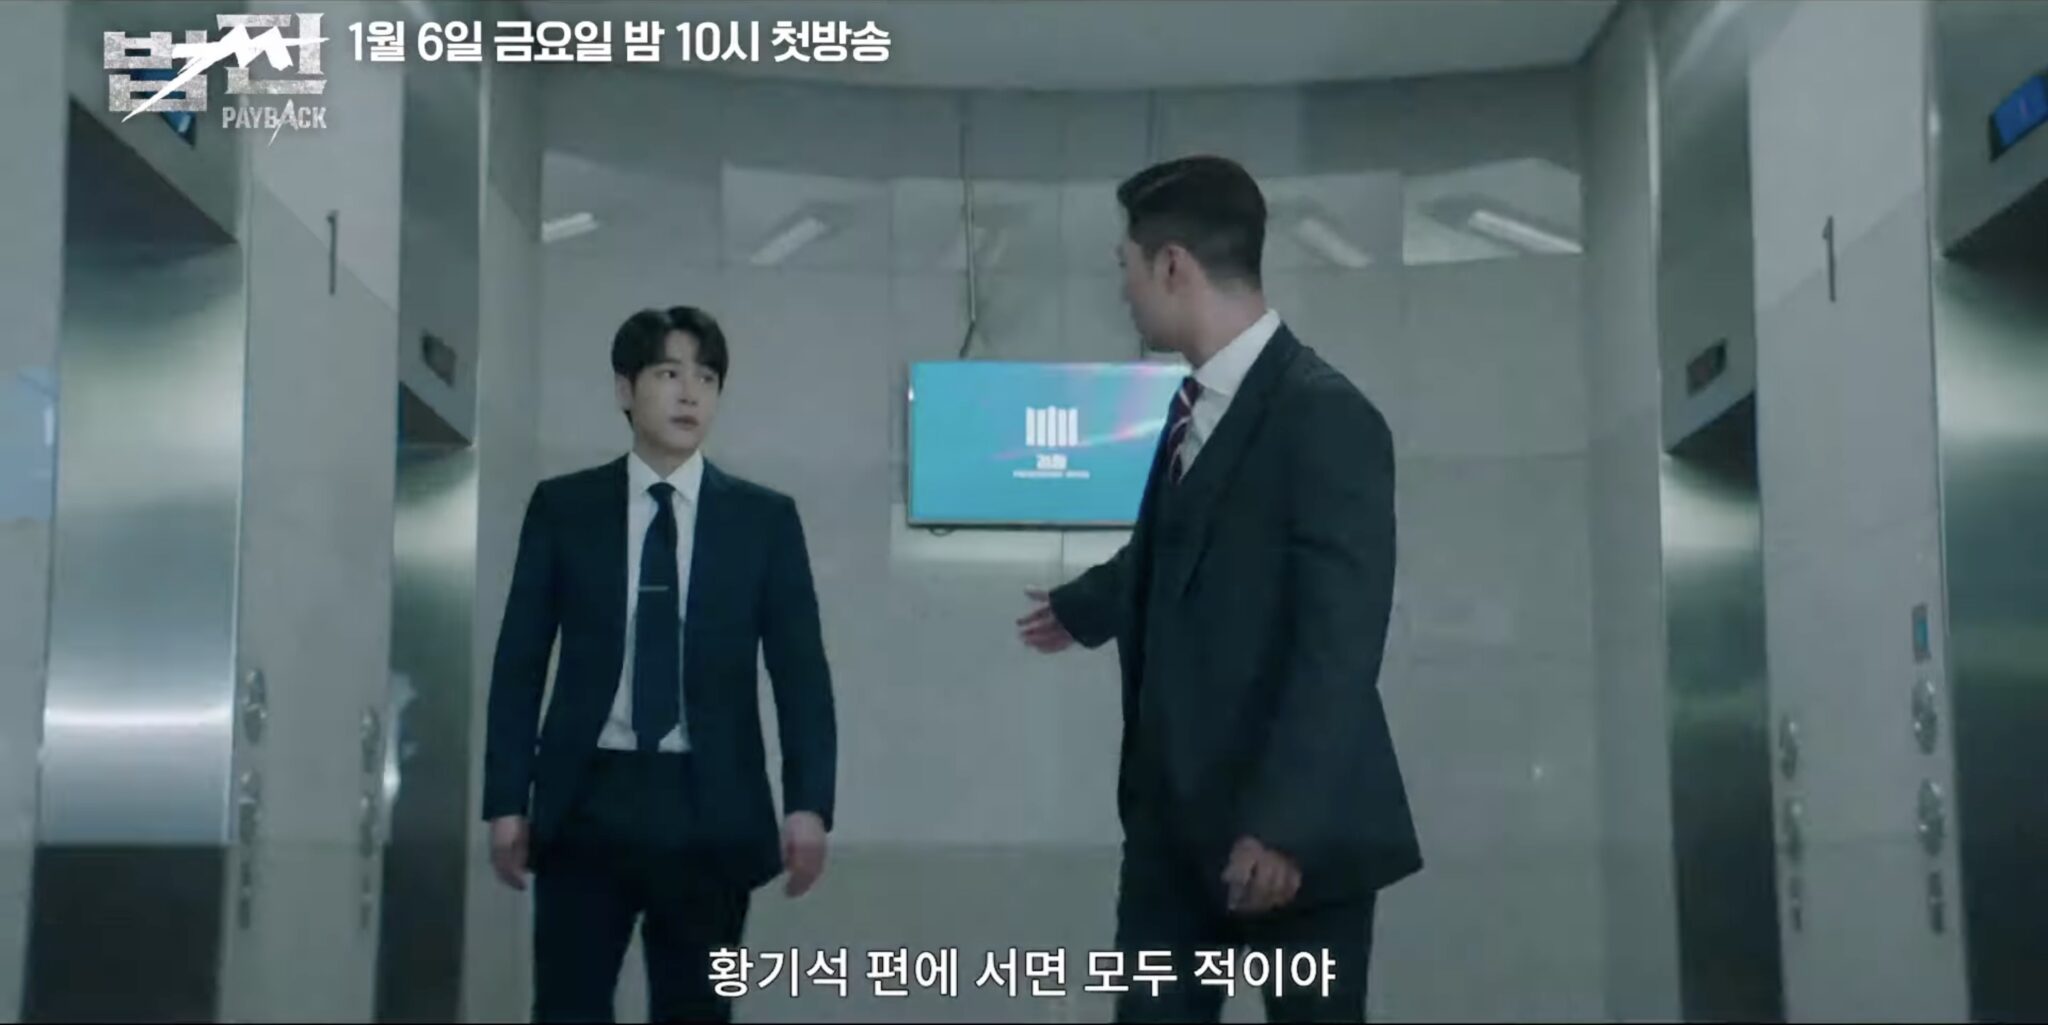 Lee Seon-kyun masterminds a stock market heist in Payback